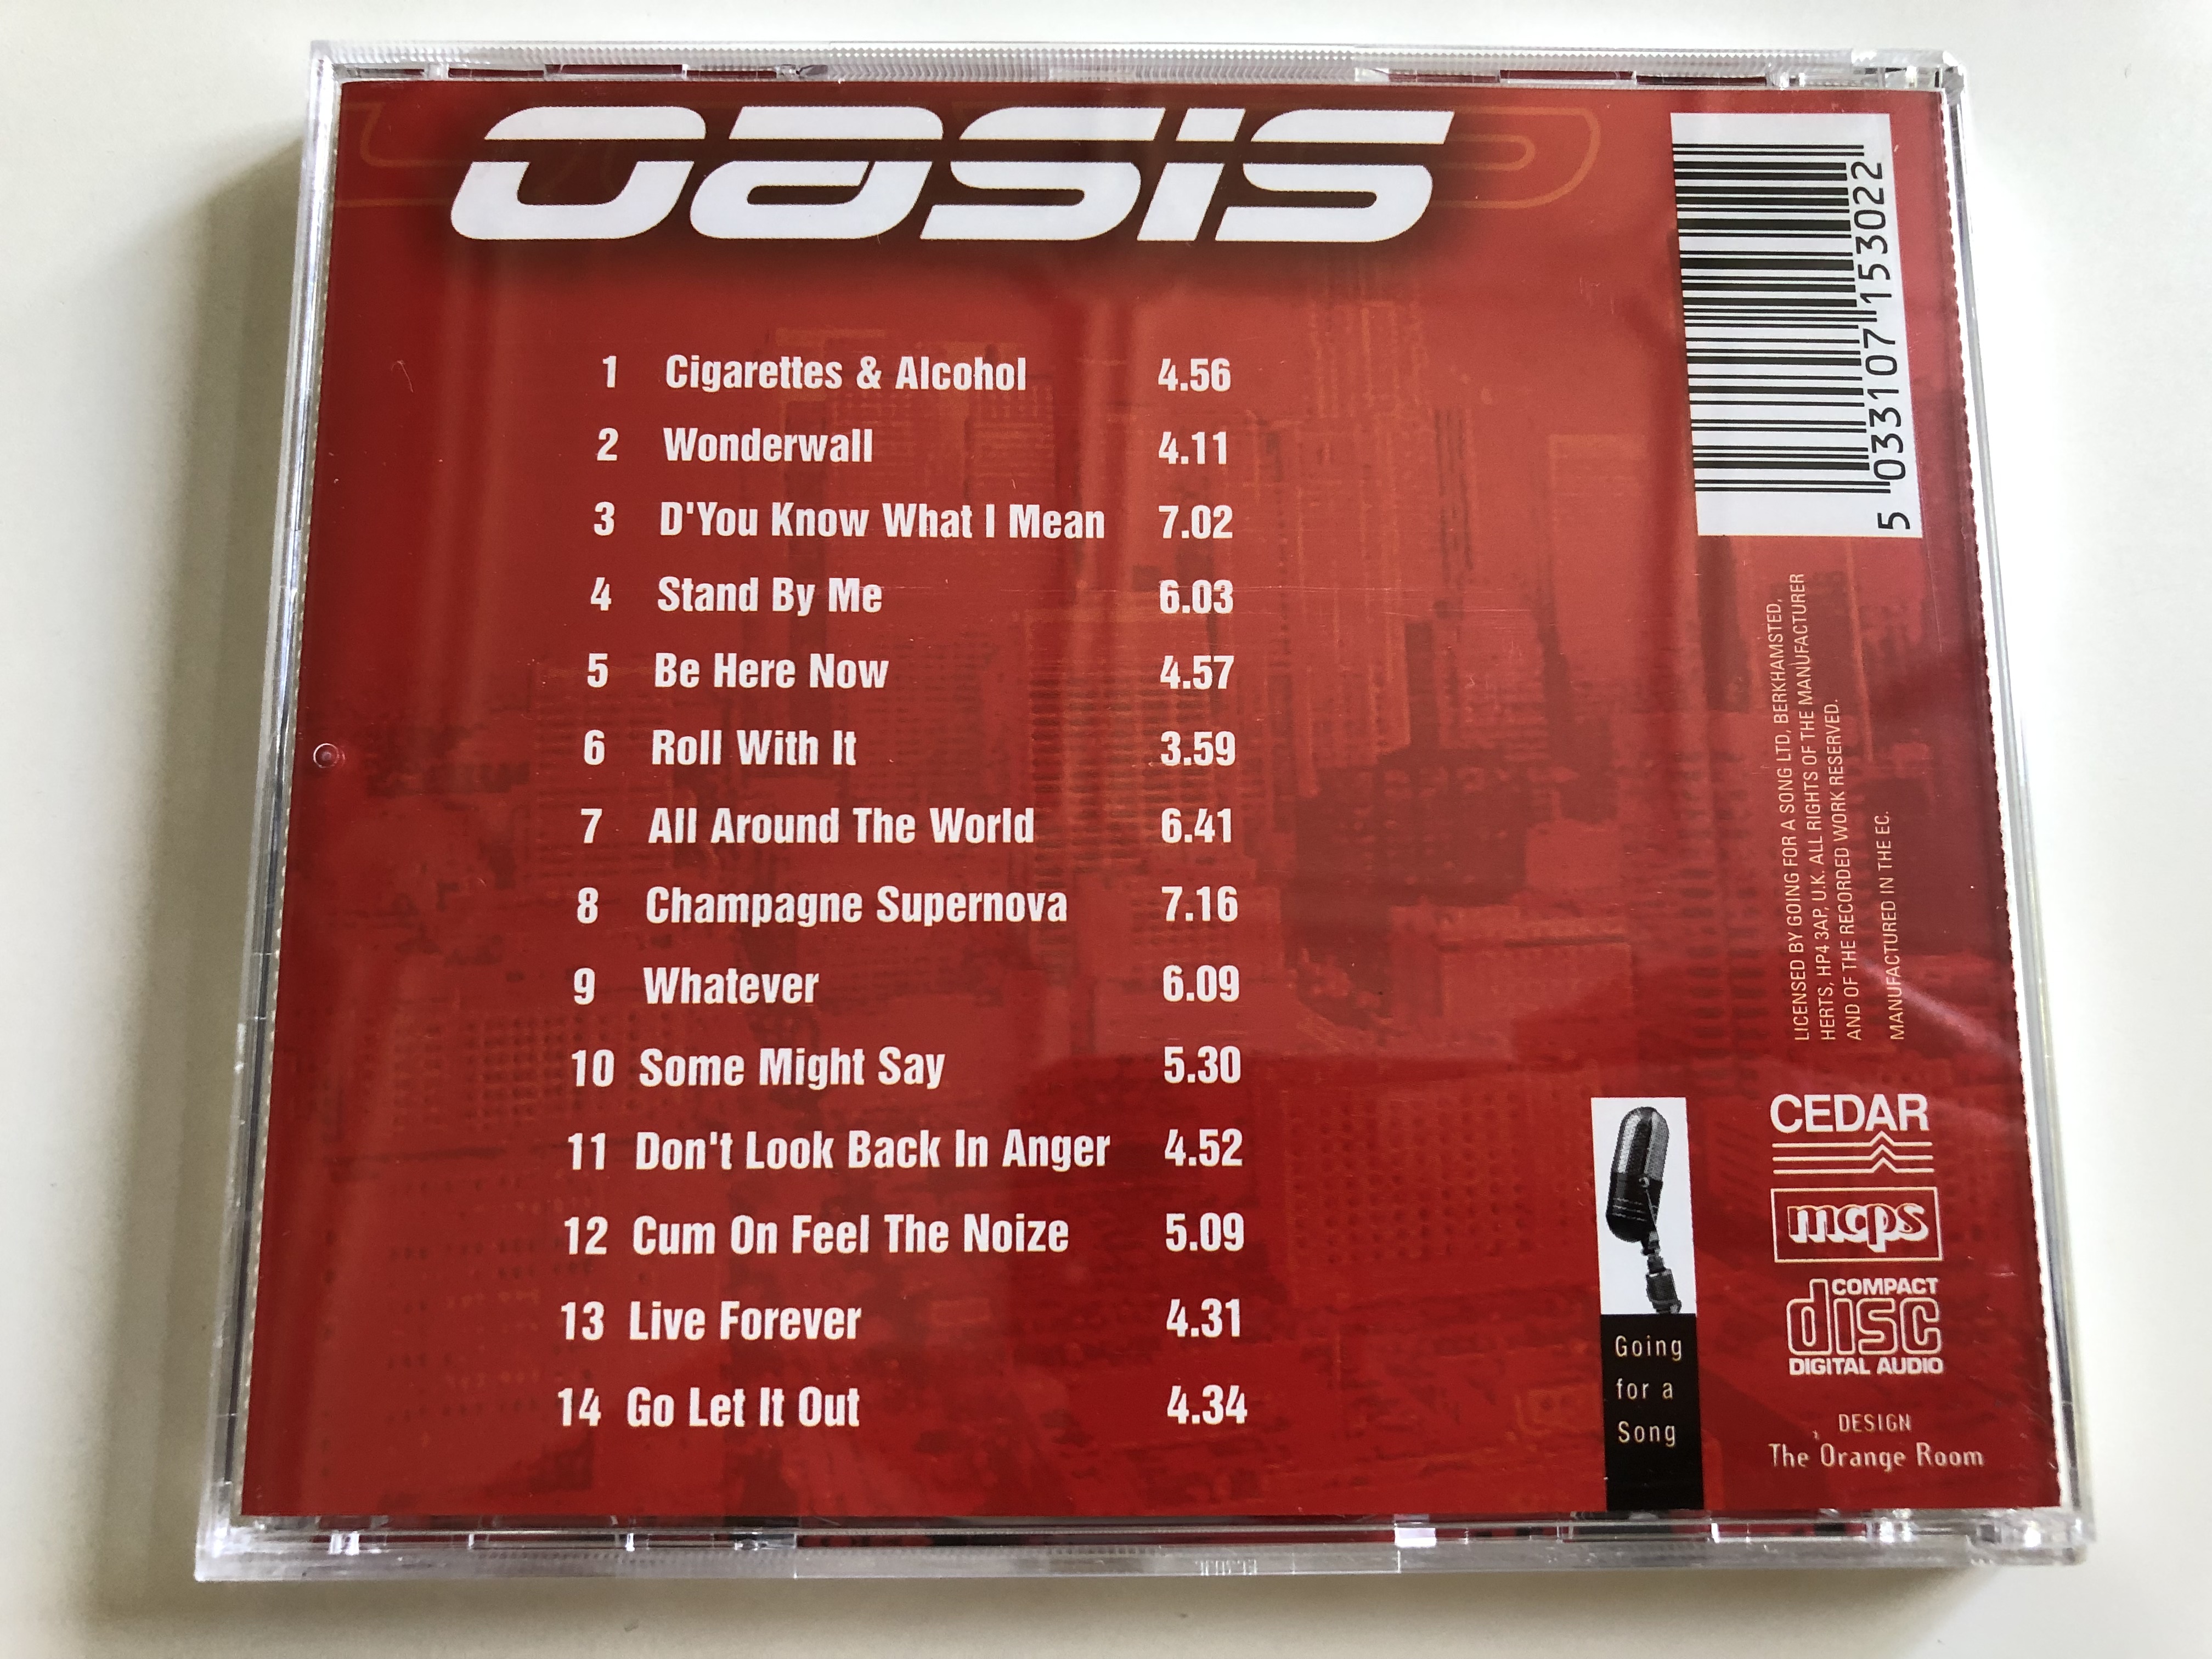 oasis-a-tribute-performed-by-studio-99-includes-the-hits...-wonderwall-be-here-now-champagne-supernova-roll-with-it-more-audio-cd-gfs530-6-.jpg